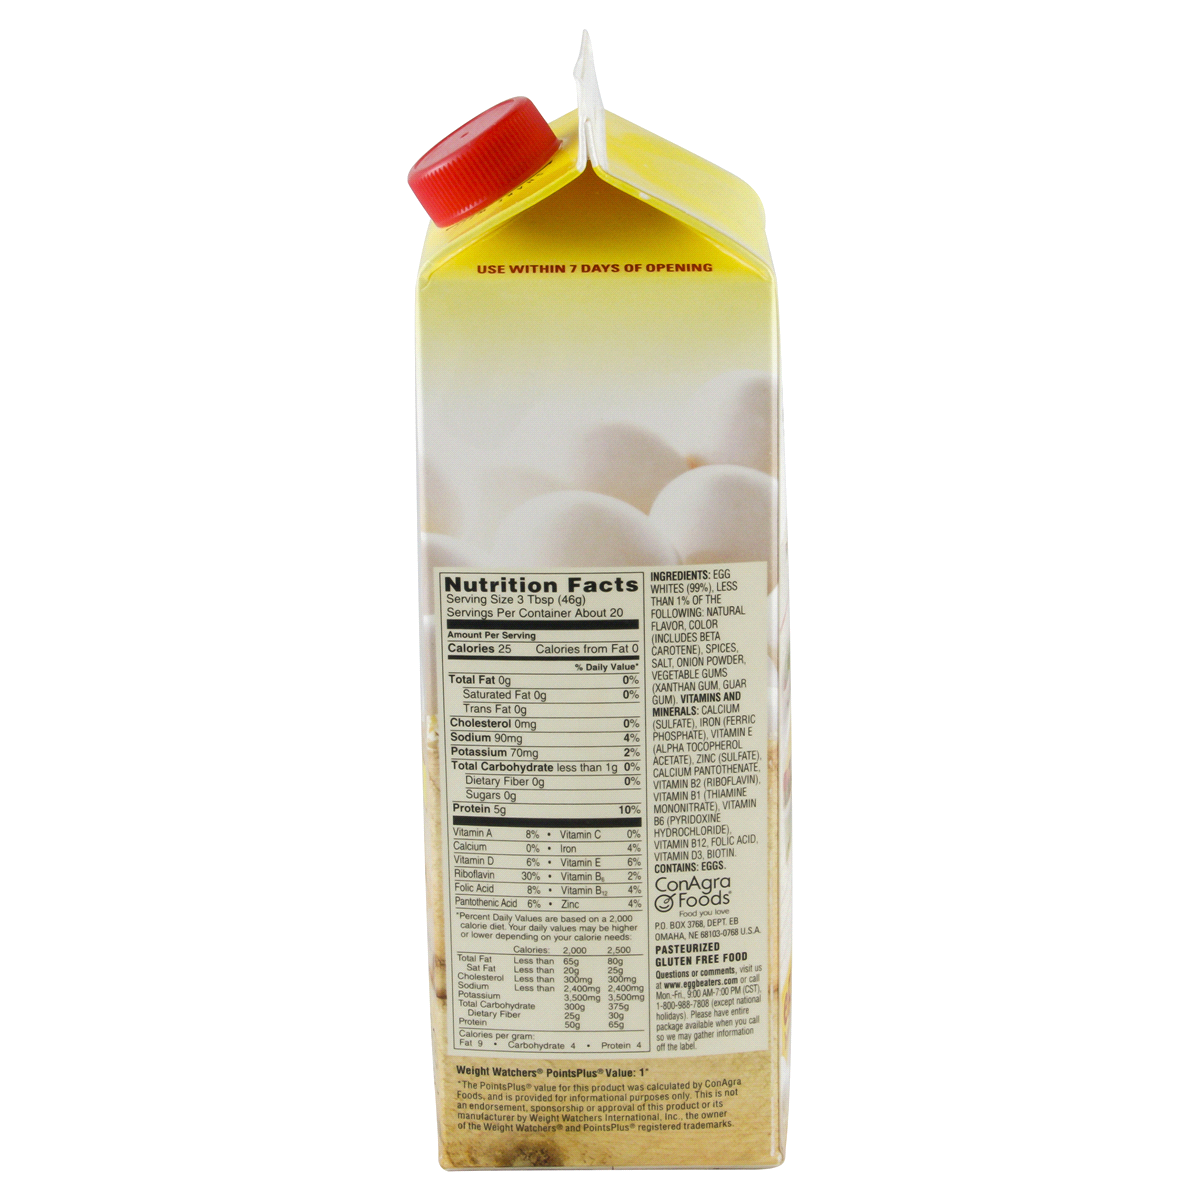 Egg Beaters Original Cholesterol Free Made From Real Eggs 32oz